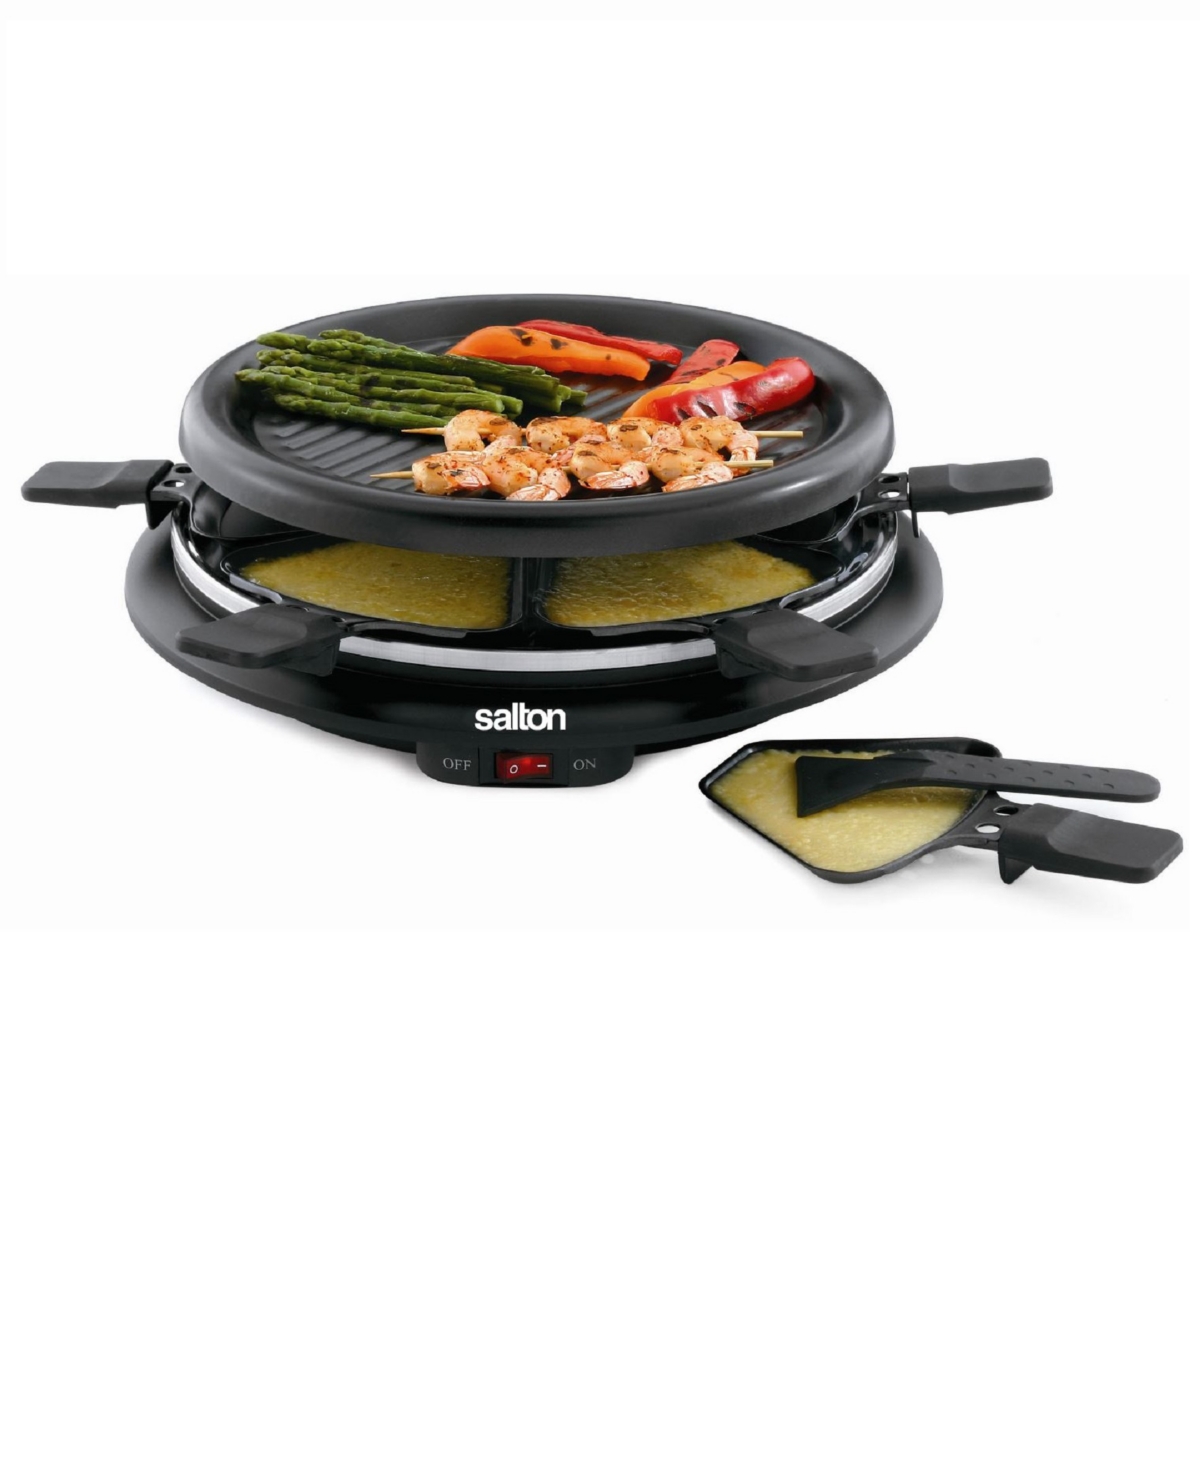 Salton Party Grill and Raclette, 6 Person